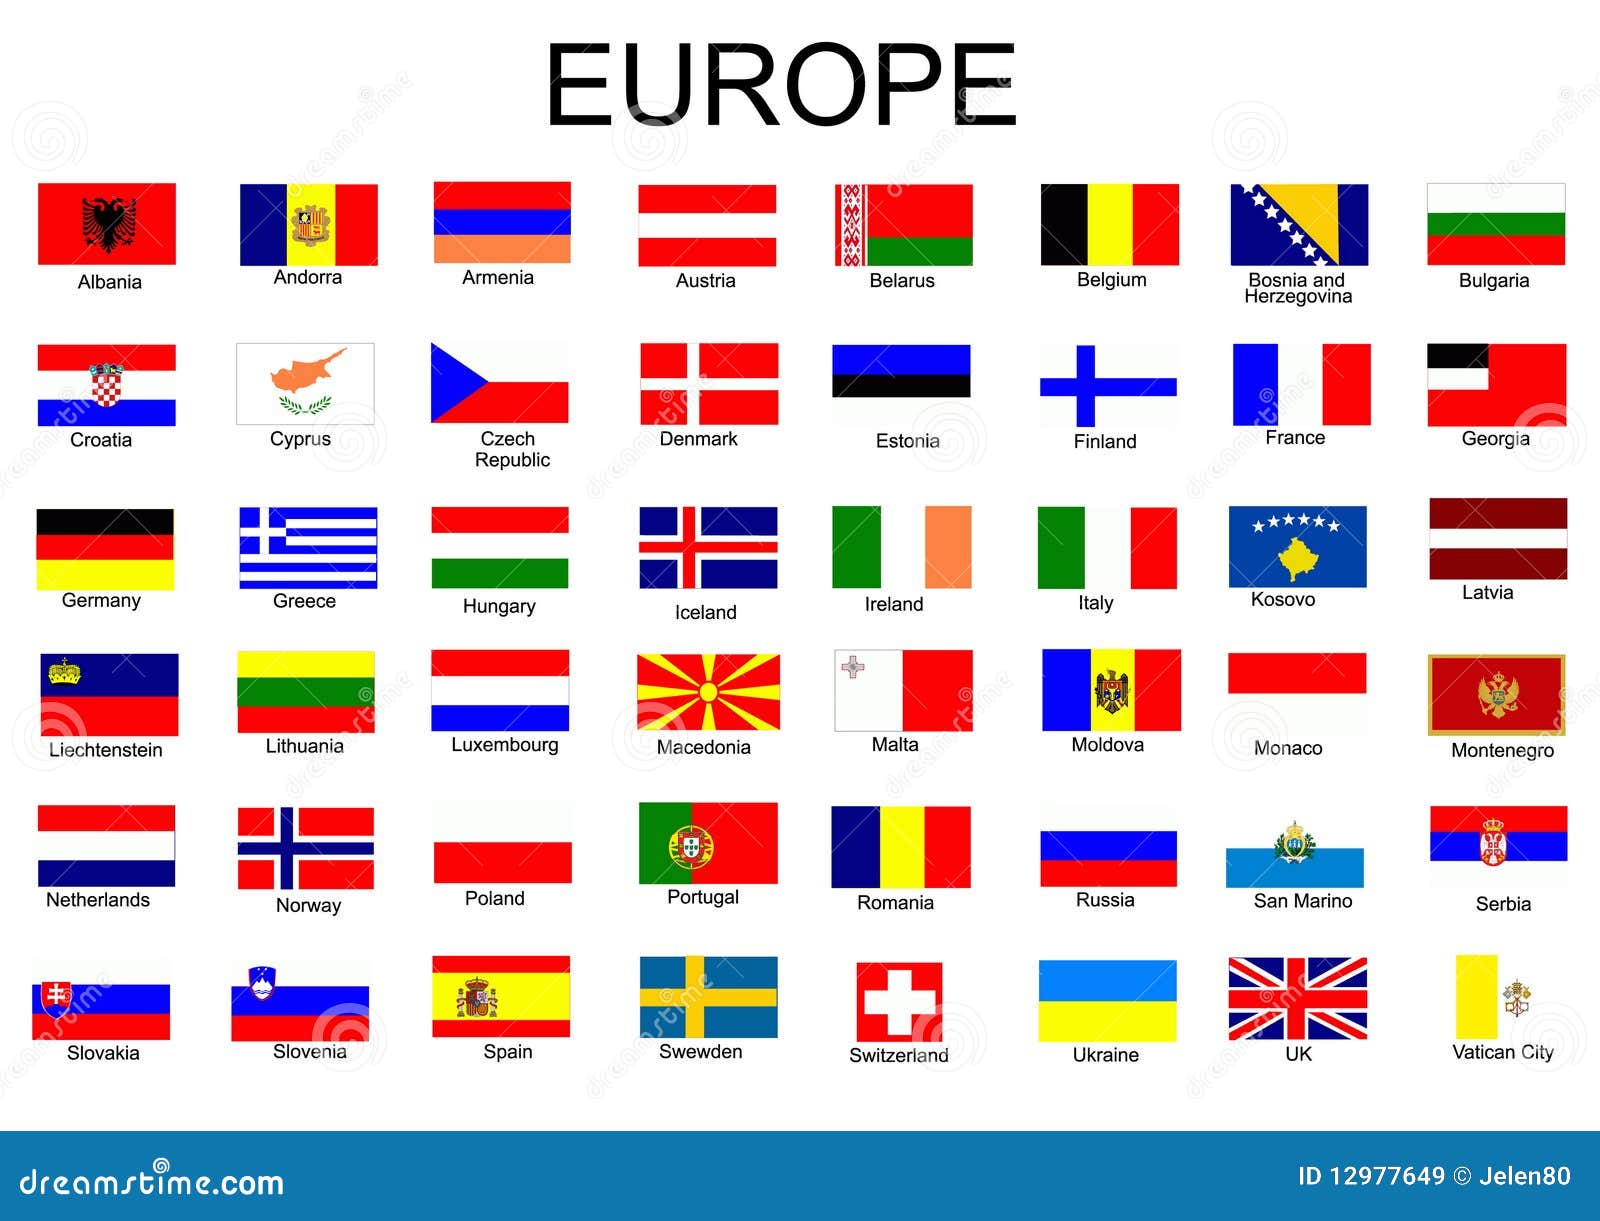 European Country Flags Royalty Free Stock Images - Image: 12977649